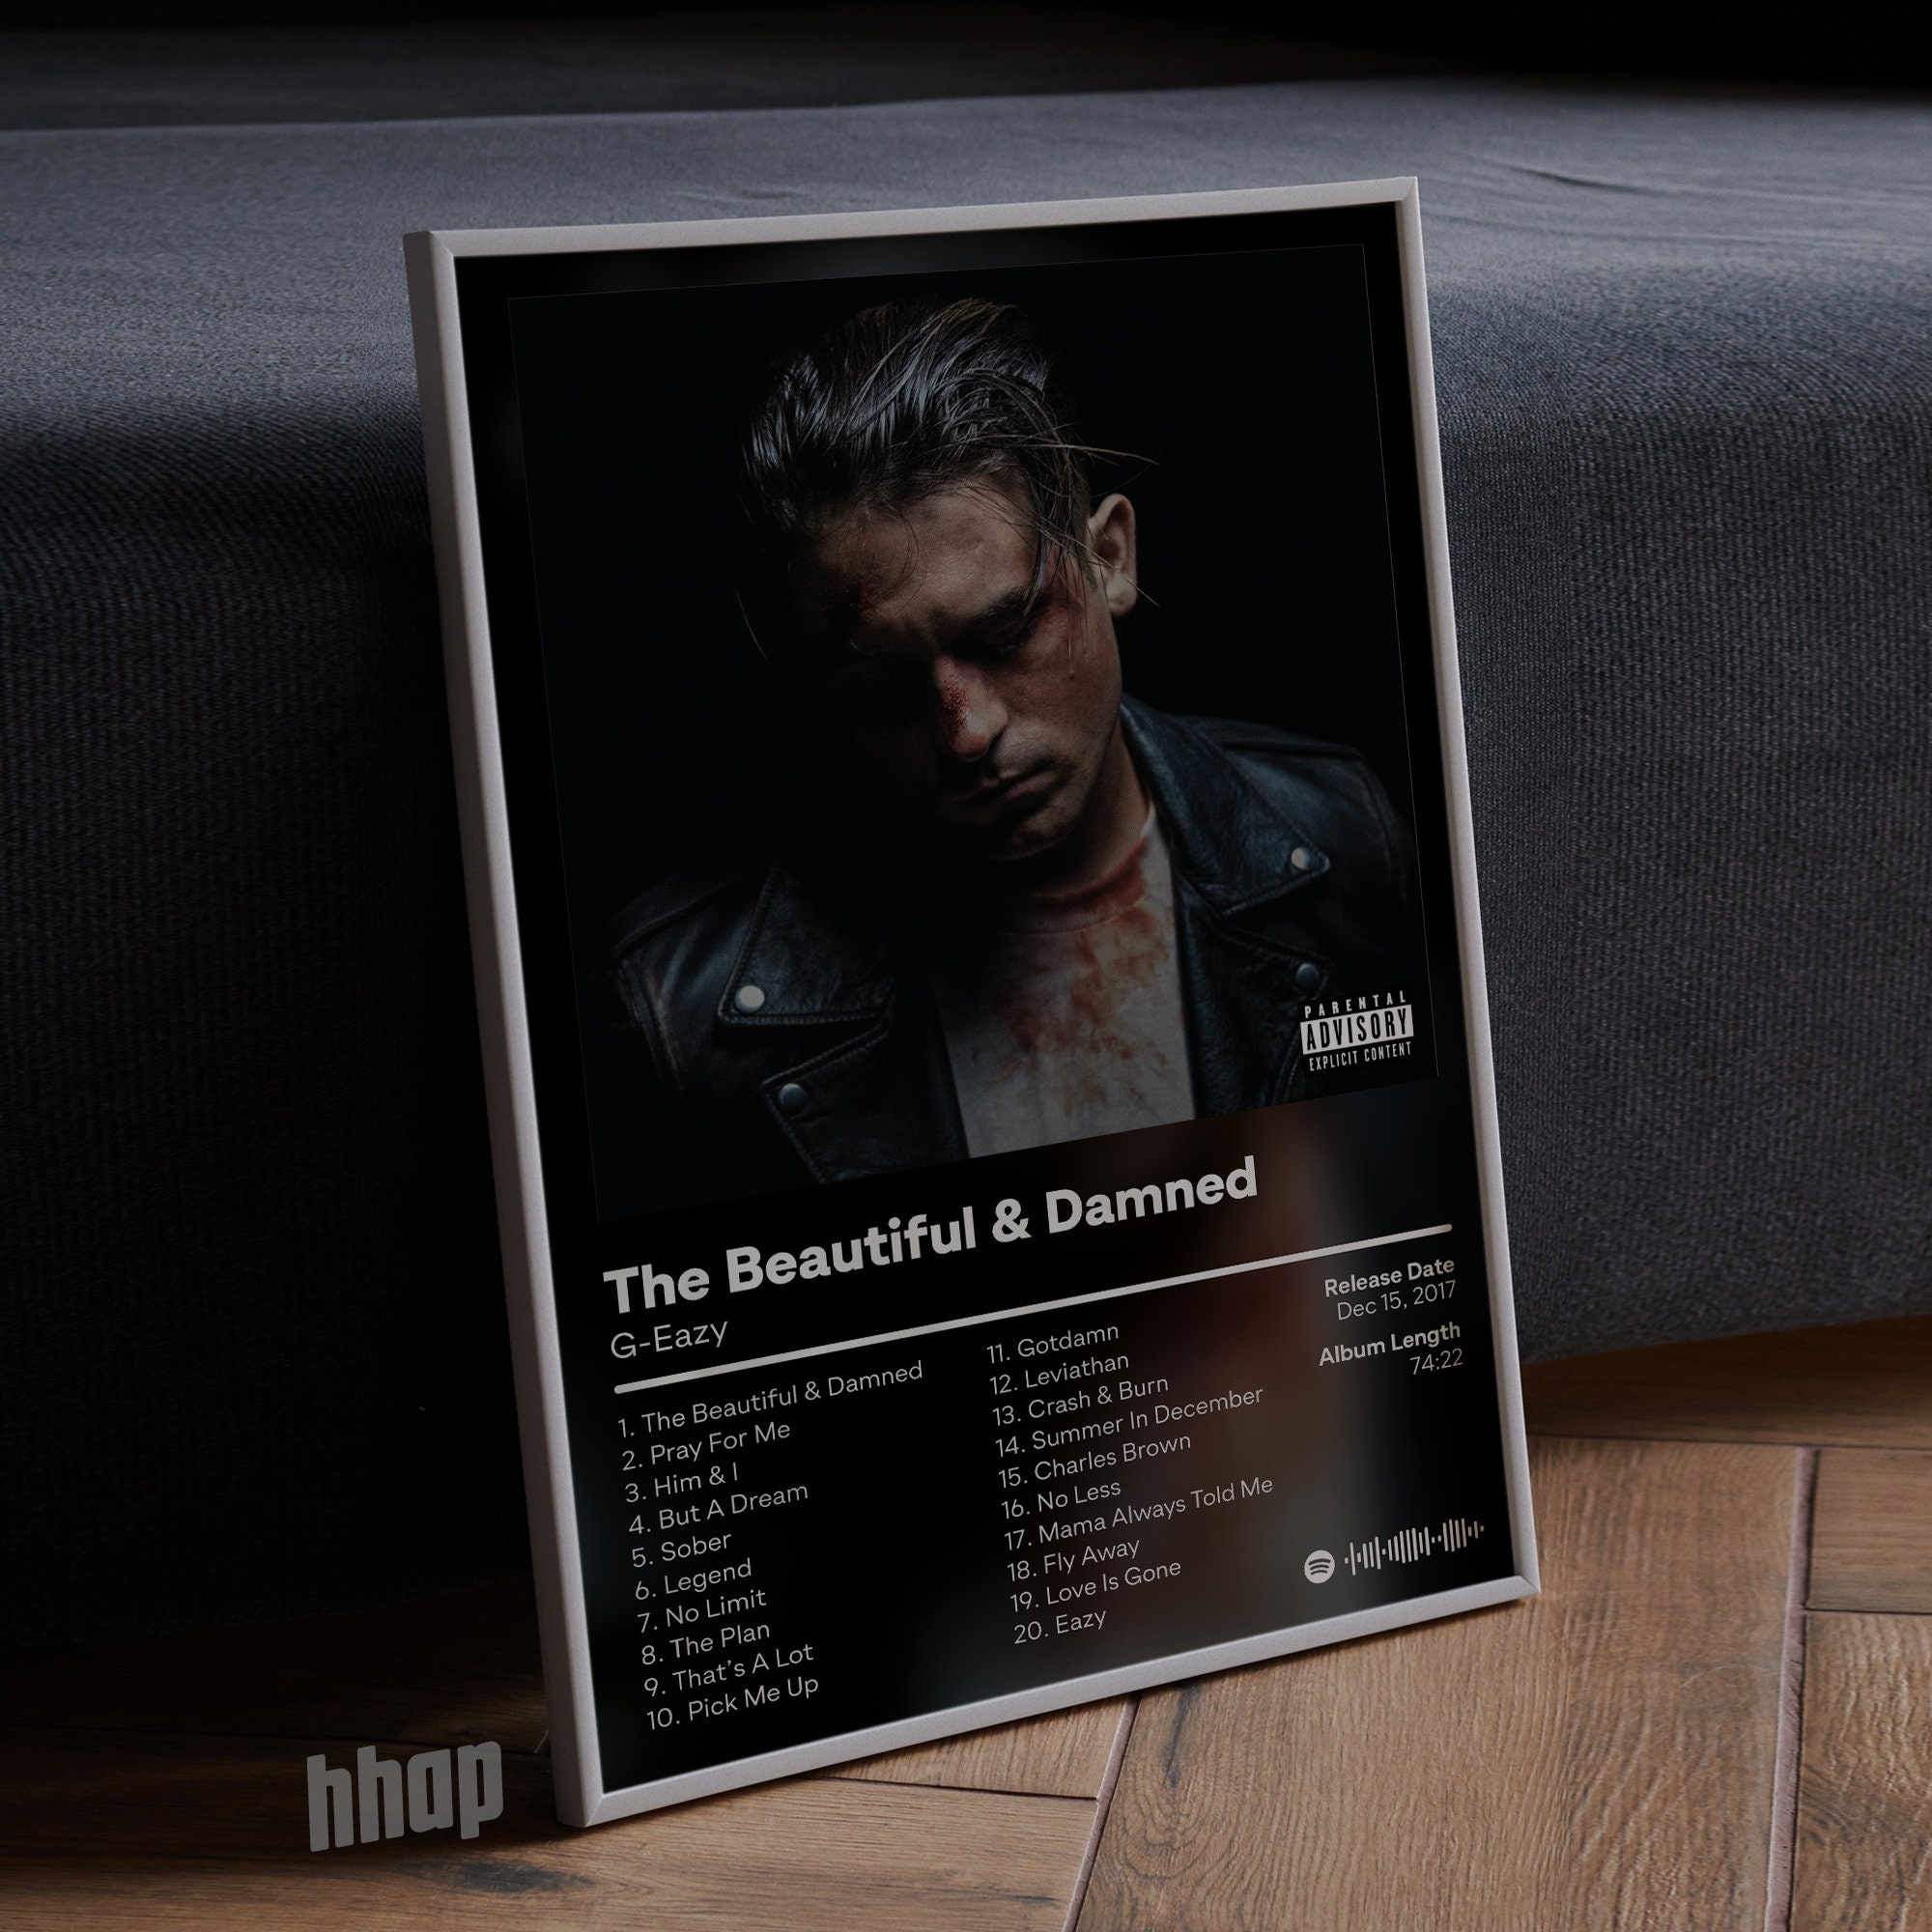 G-Eazy's New Double Album 'The Beautiful & Damned' Was Inspired by